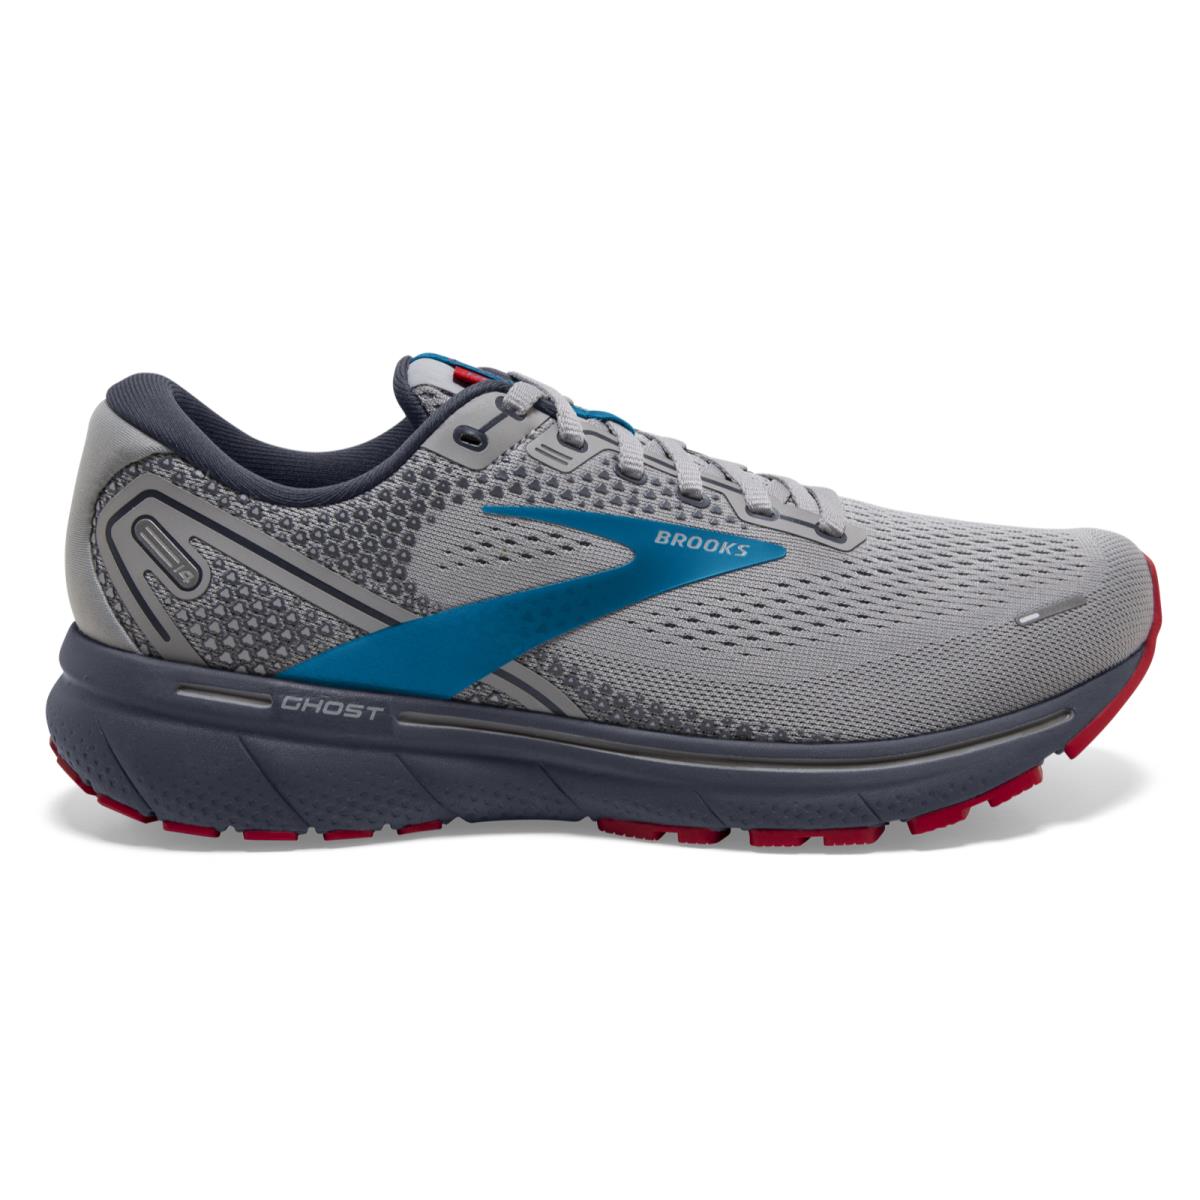 Brooks Ghost 14 Grey Metallic Blue Red 11.5 110369 1D 078 Cushion Running Shoes